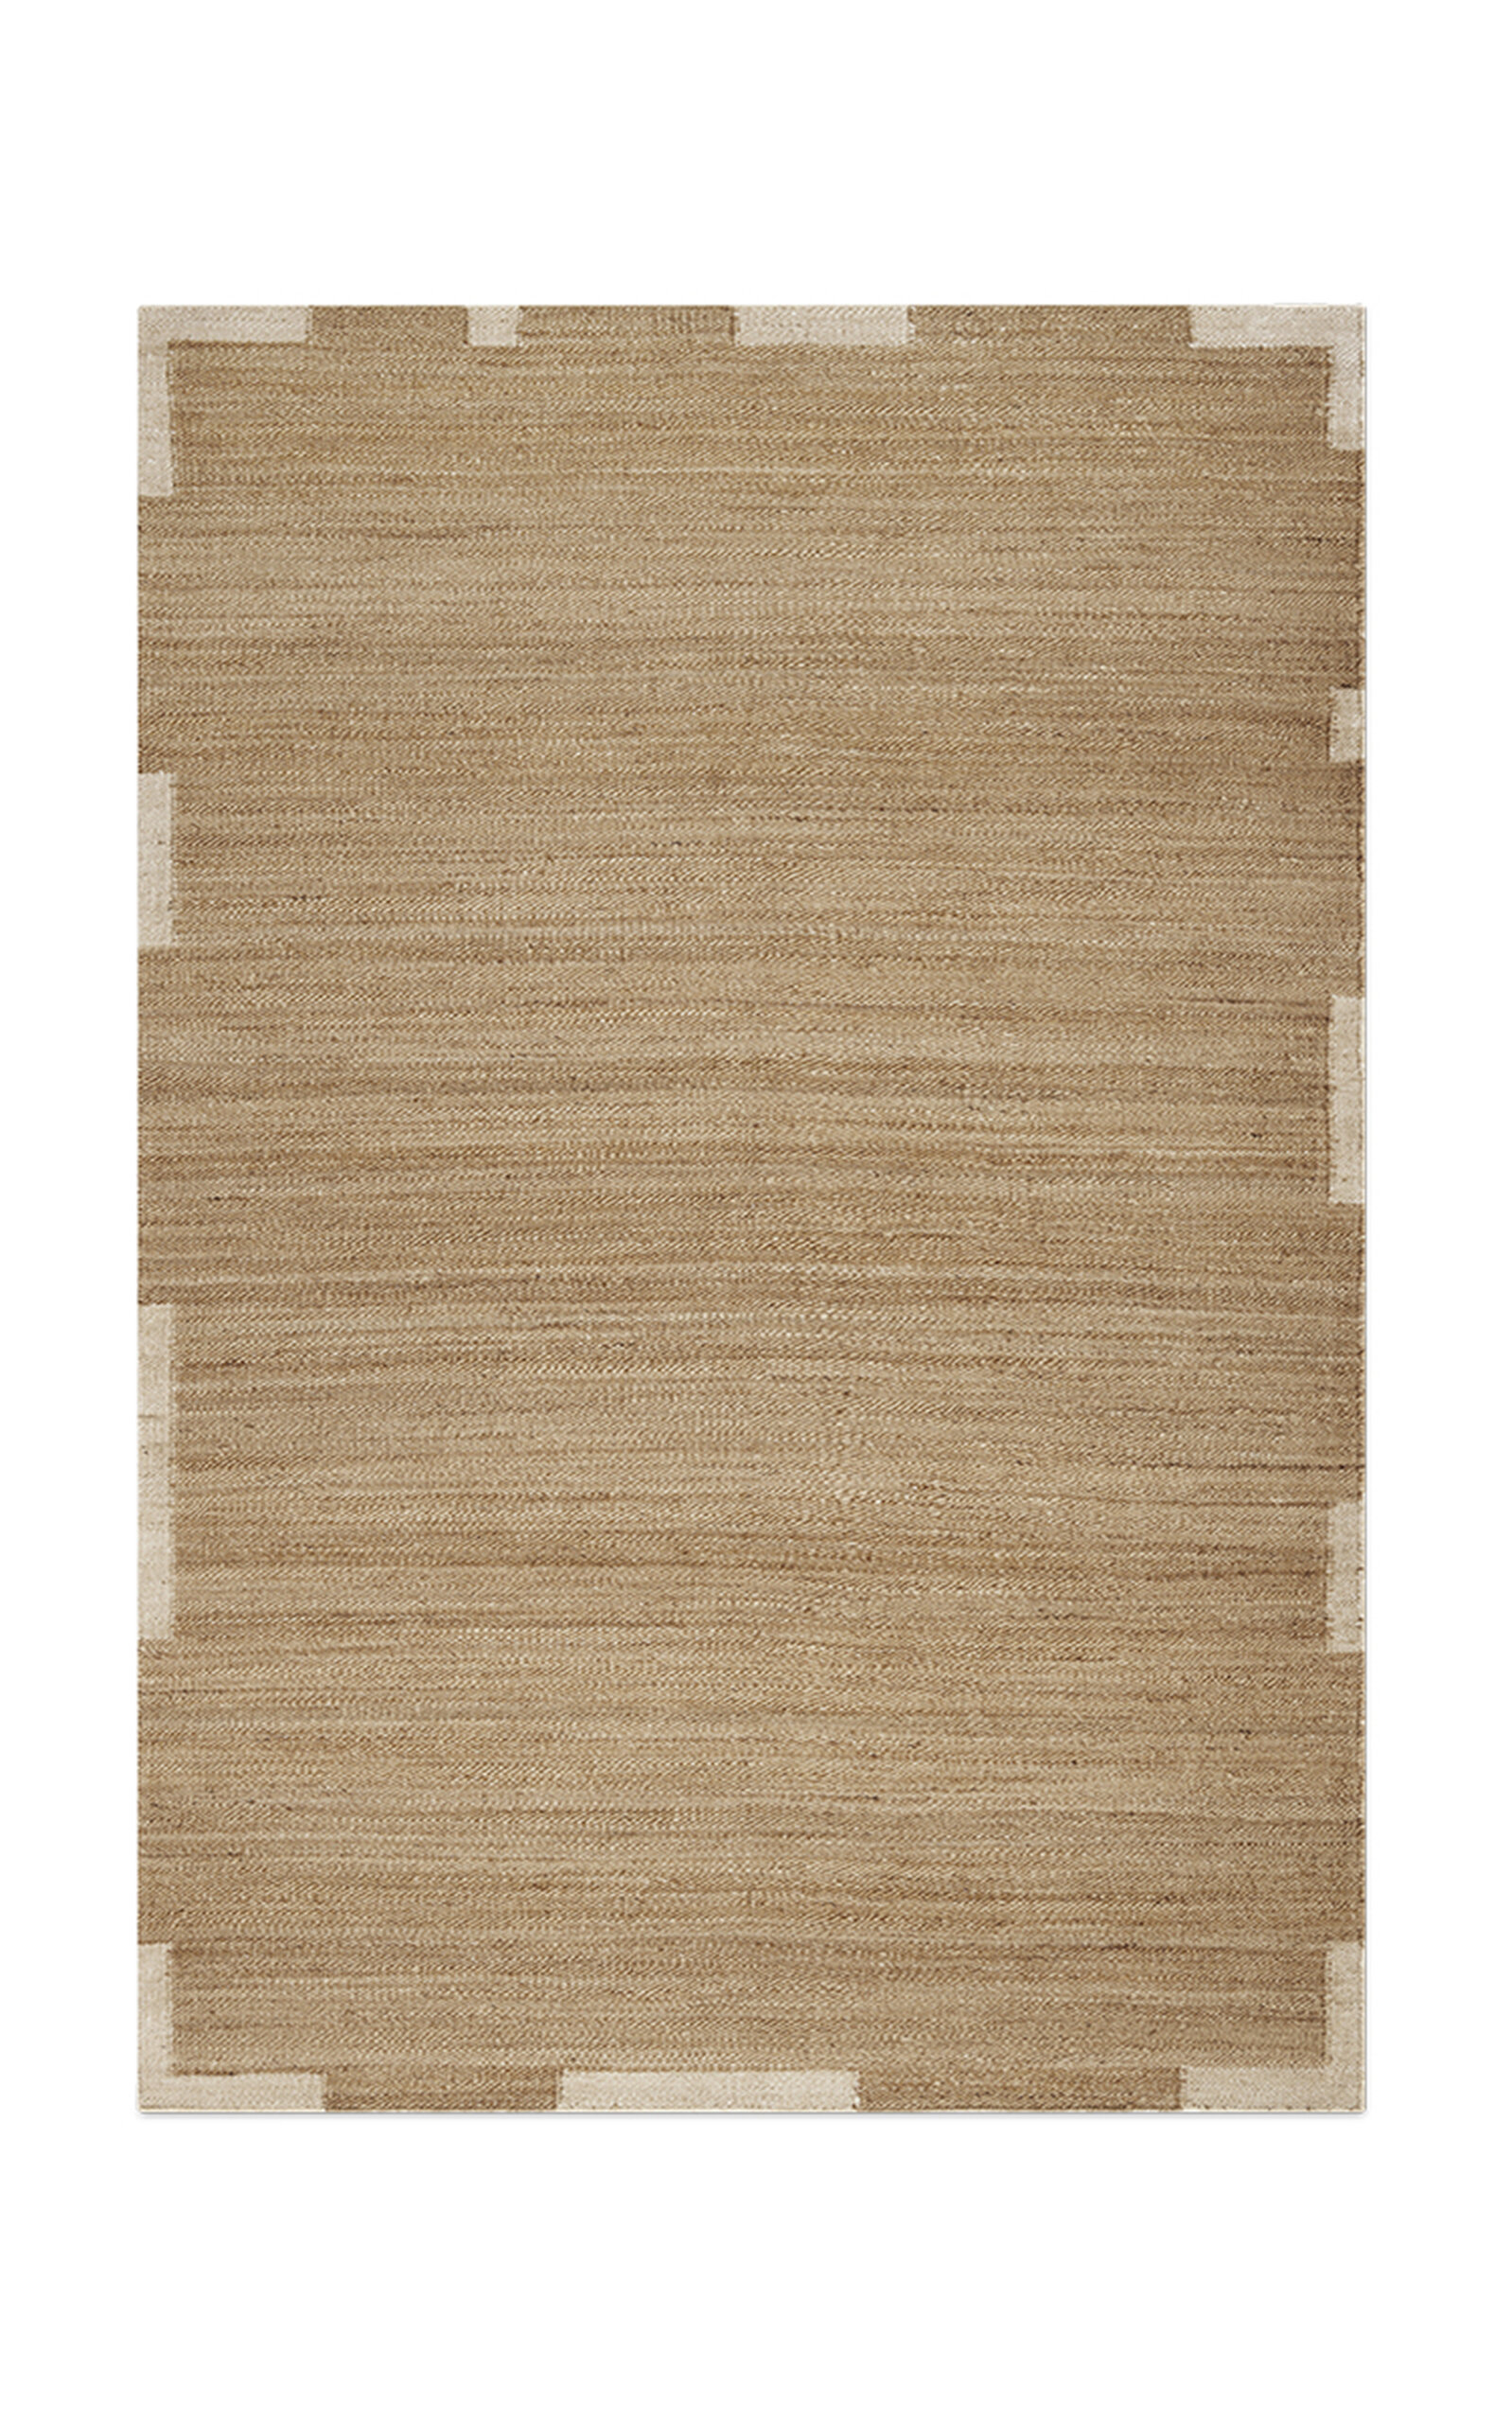 Nordic Knots Jute Edge By ; Flatweave Area Rug In Cream; Size 6' X 9' In Brown